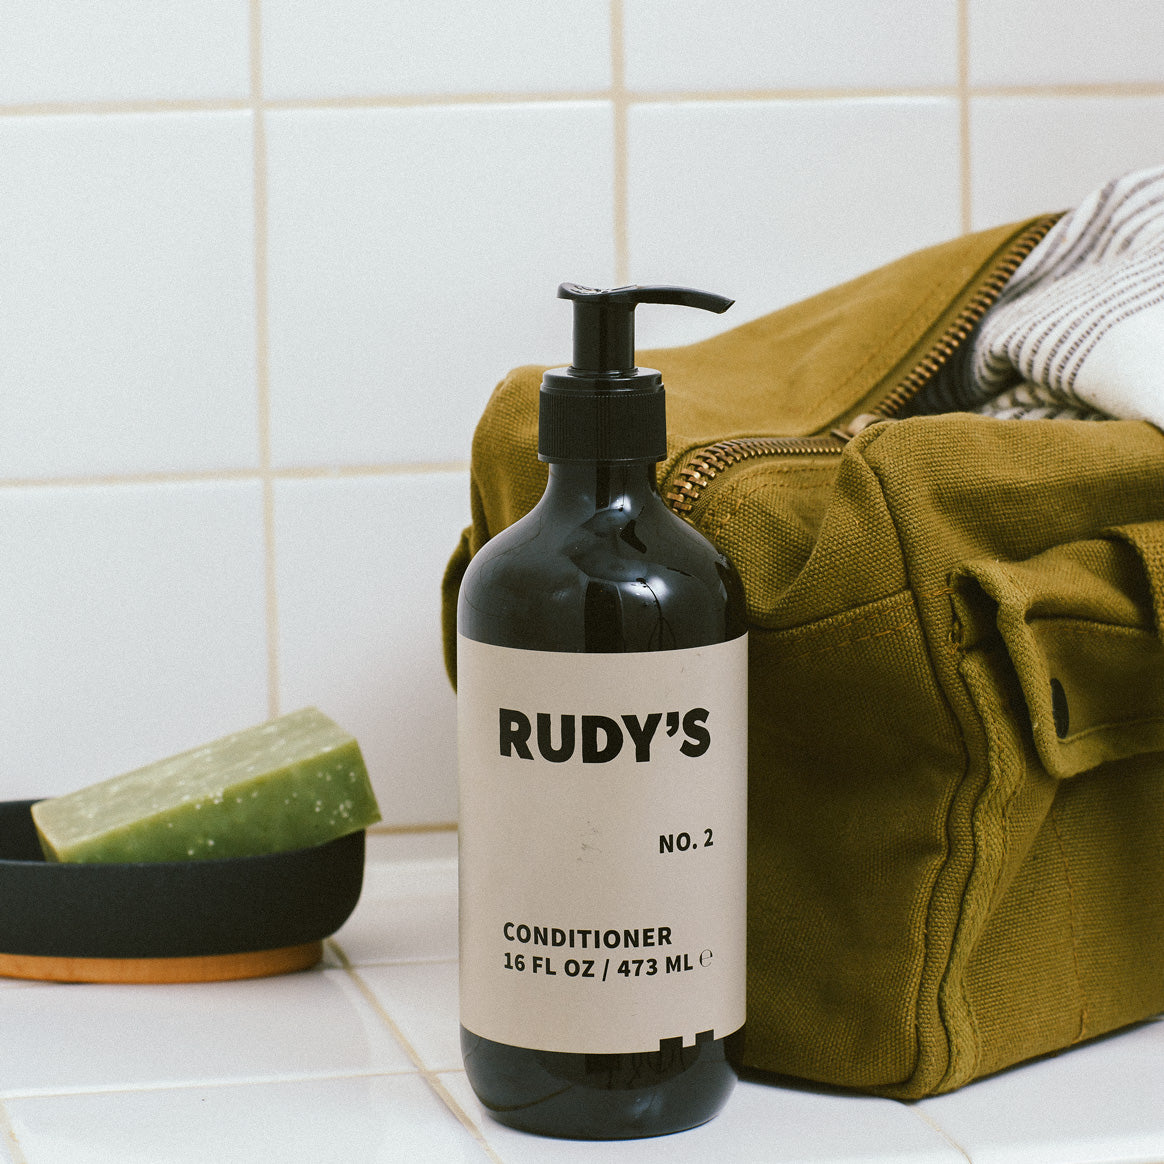 Rudy's Barbershop No. 2 Conditioner in your shower